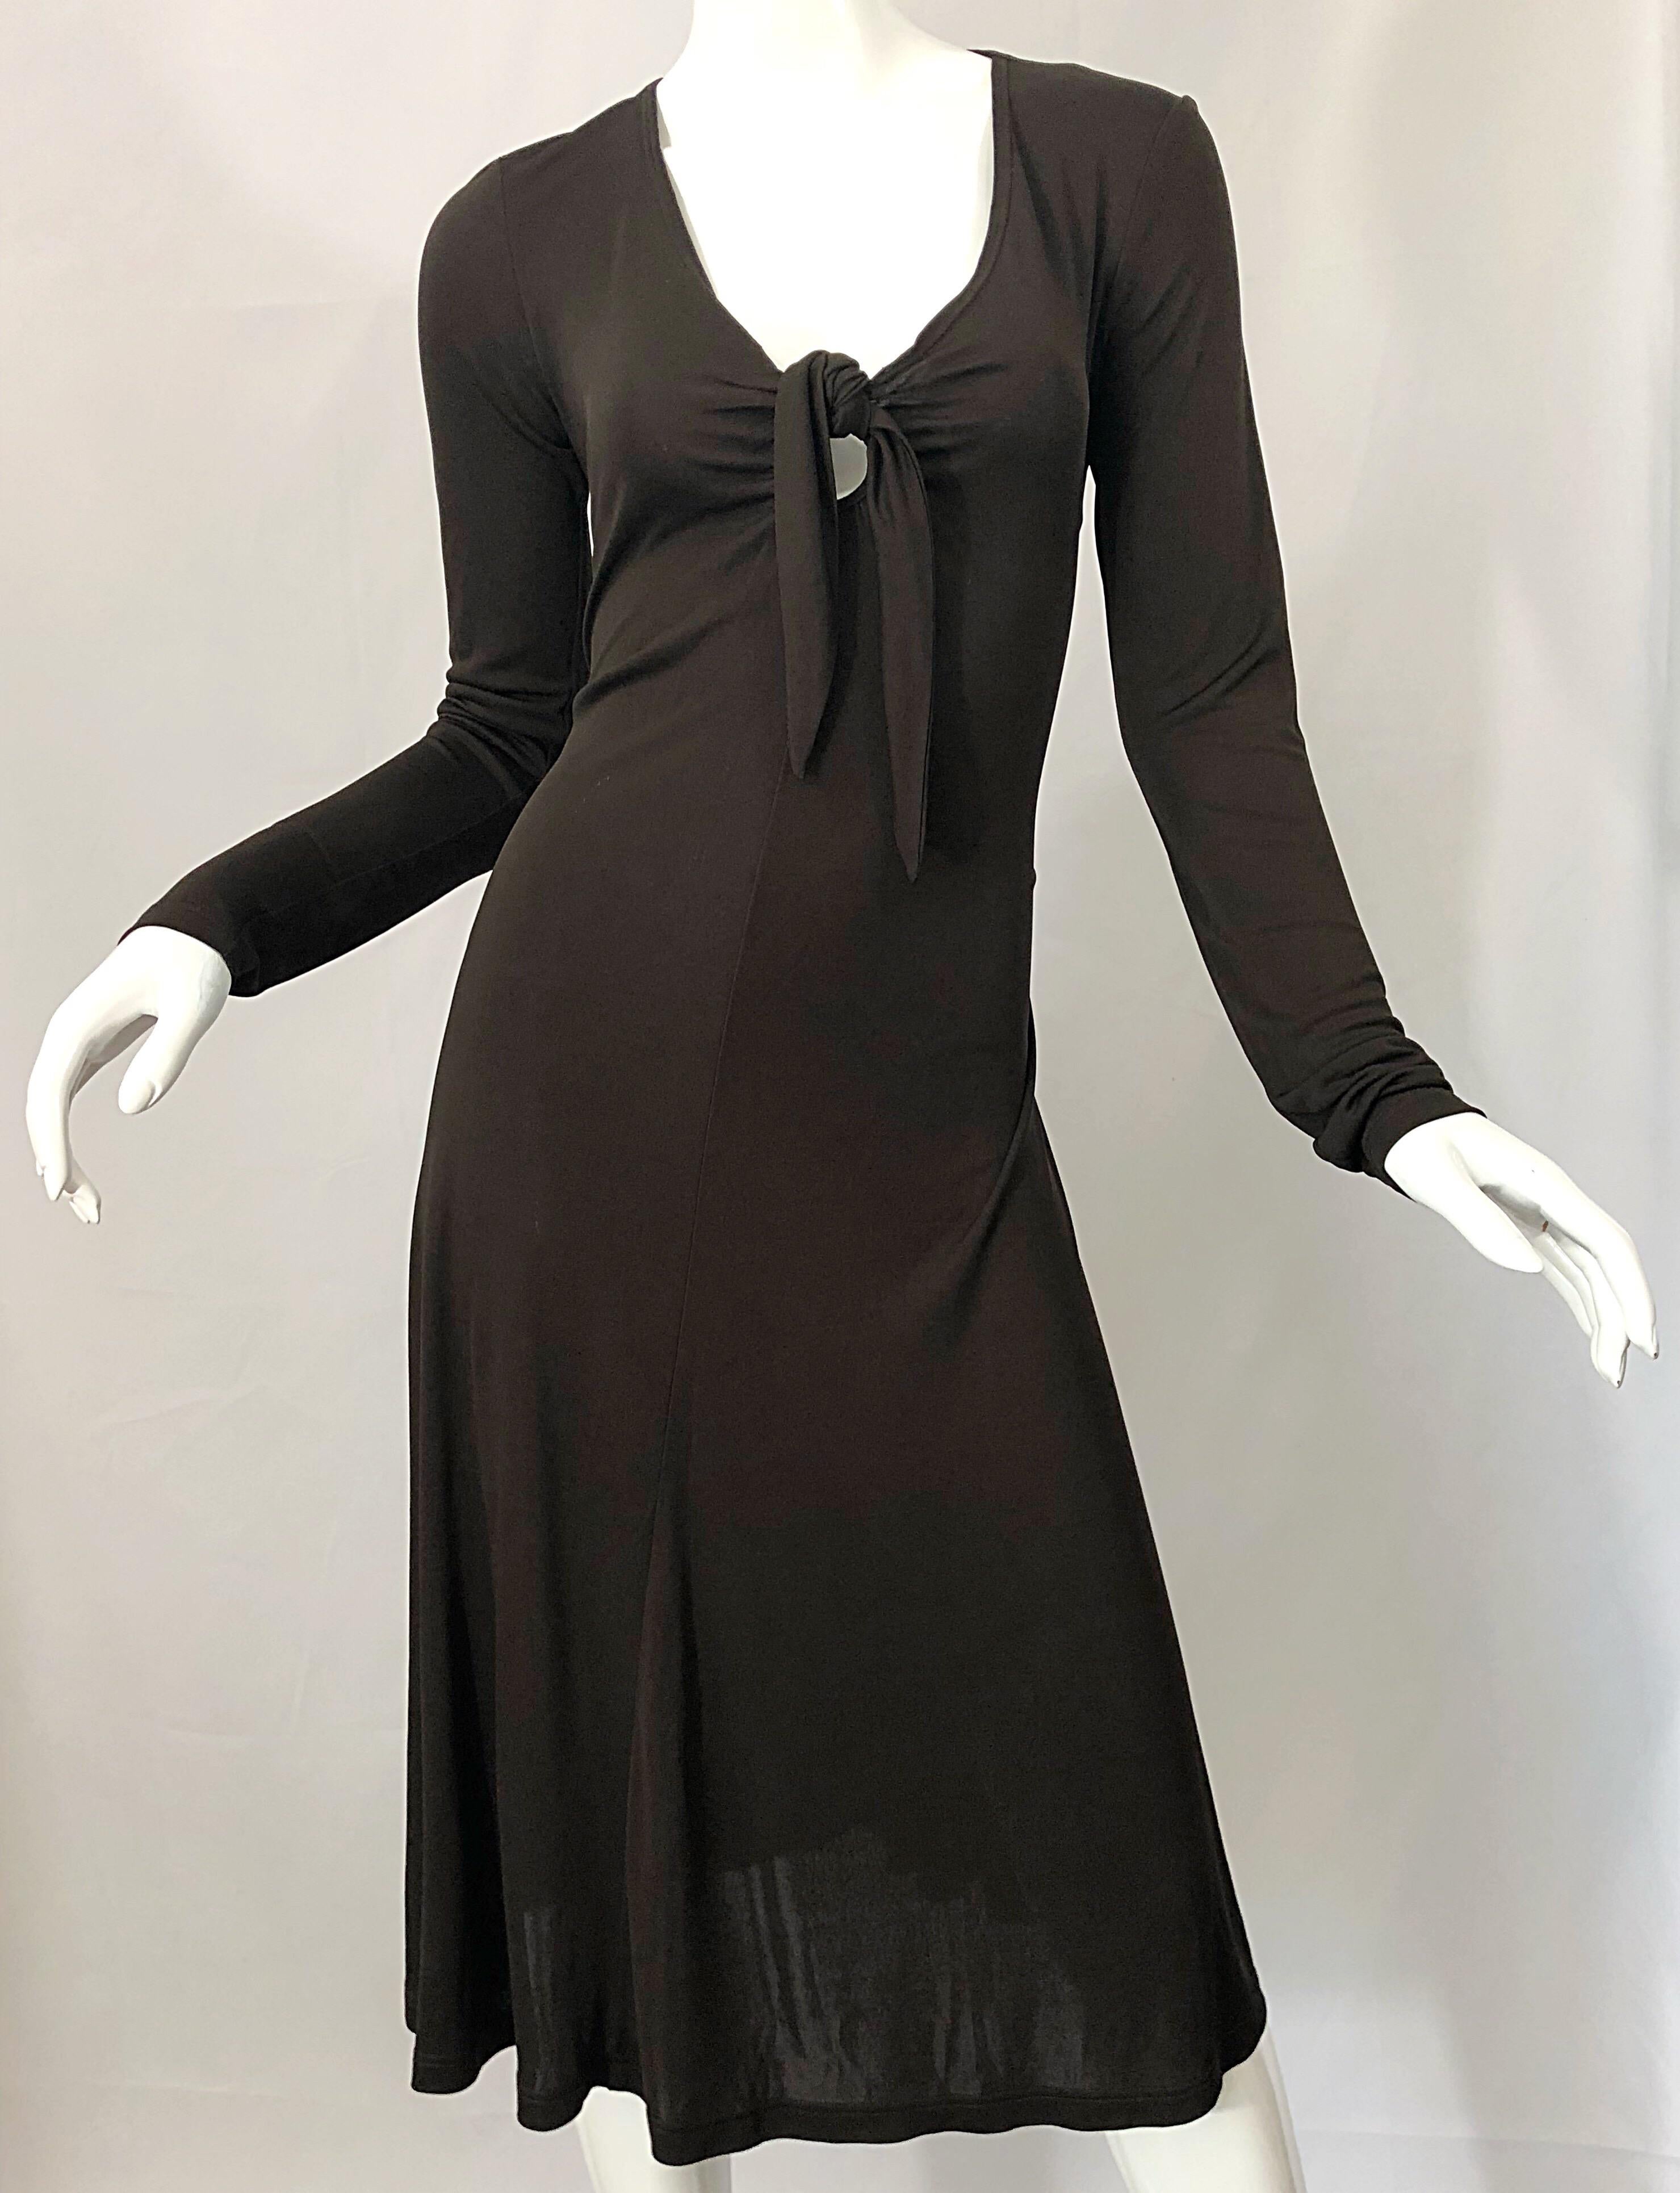 Effortlessly chic MICHAEL KORS COLLECTION brown rayon jersey long sleeve keyhole dress! Features Kors' signature soft jersey that stretches to fit, and really flatters the body. Tailored bodice with sleek long sleeves. Peek-a-boo keyhole ties at